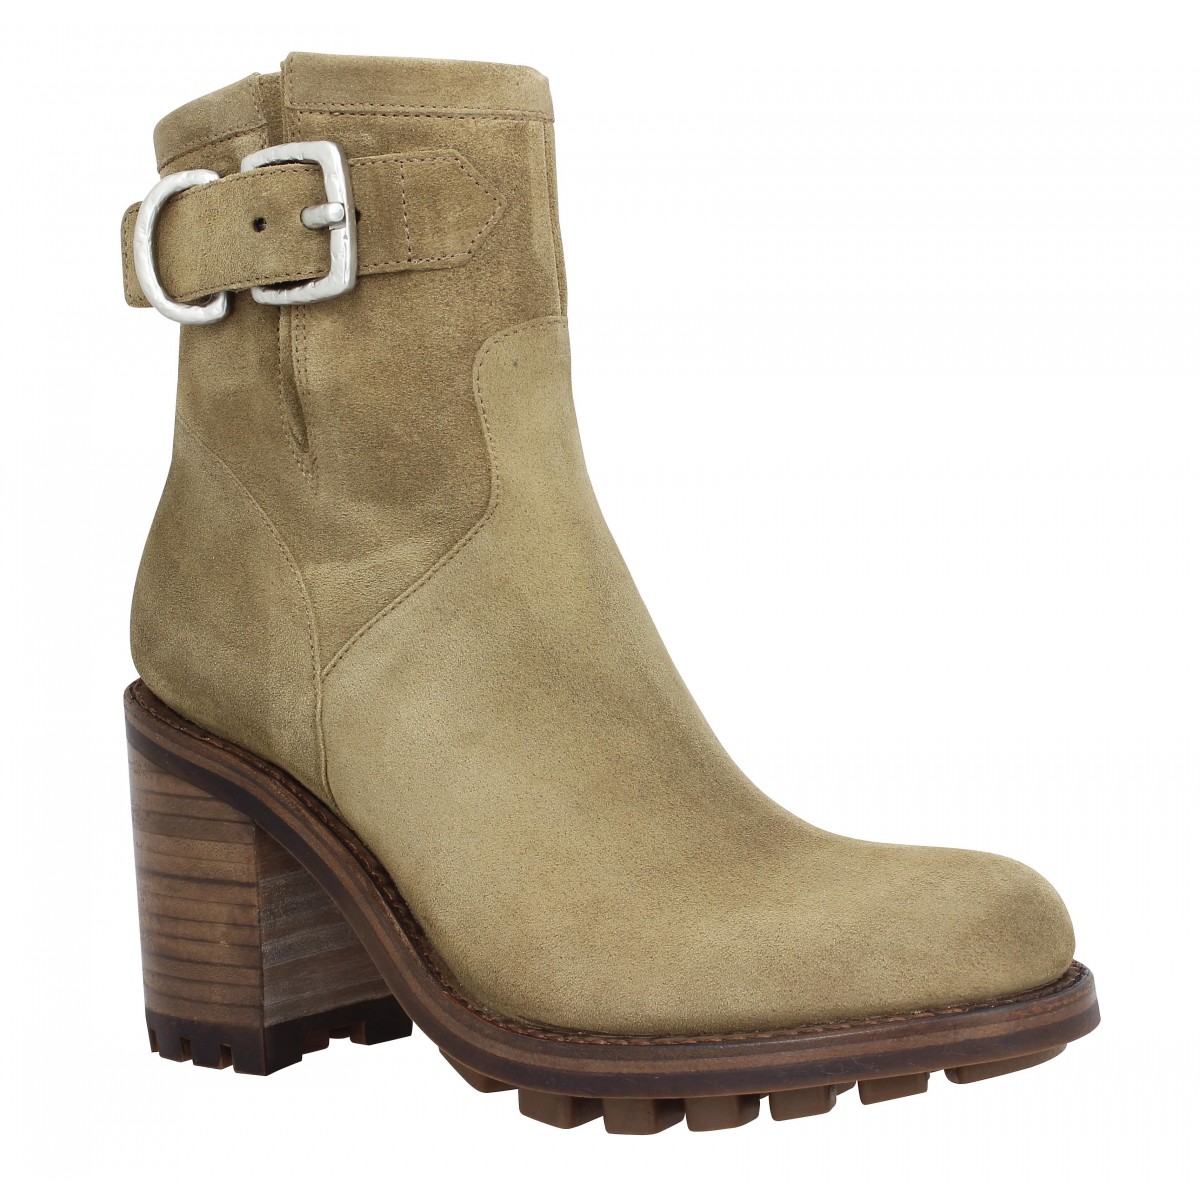 Bottes FREE LANCE Justy 9 Small Gero Buckle velours Femme Taupe